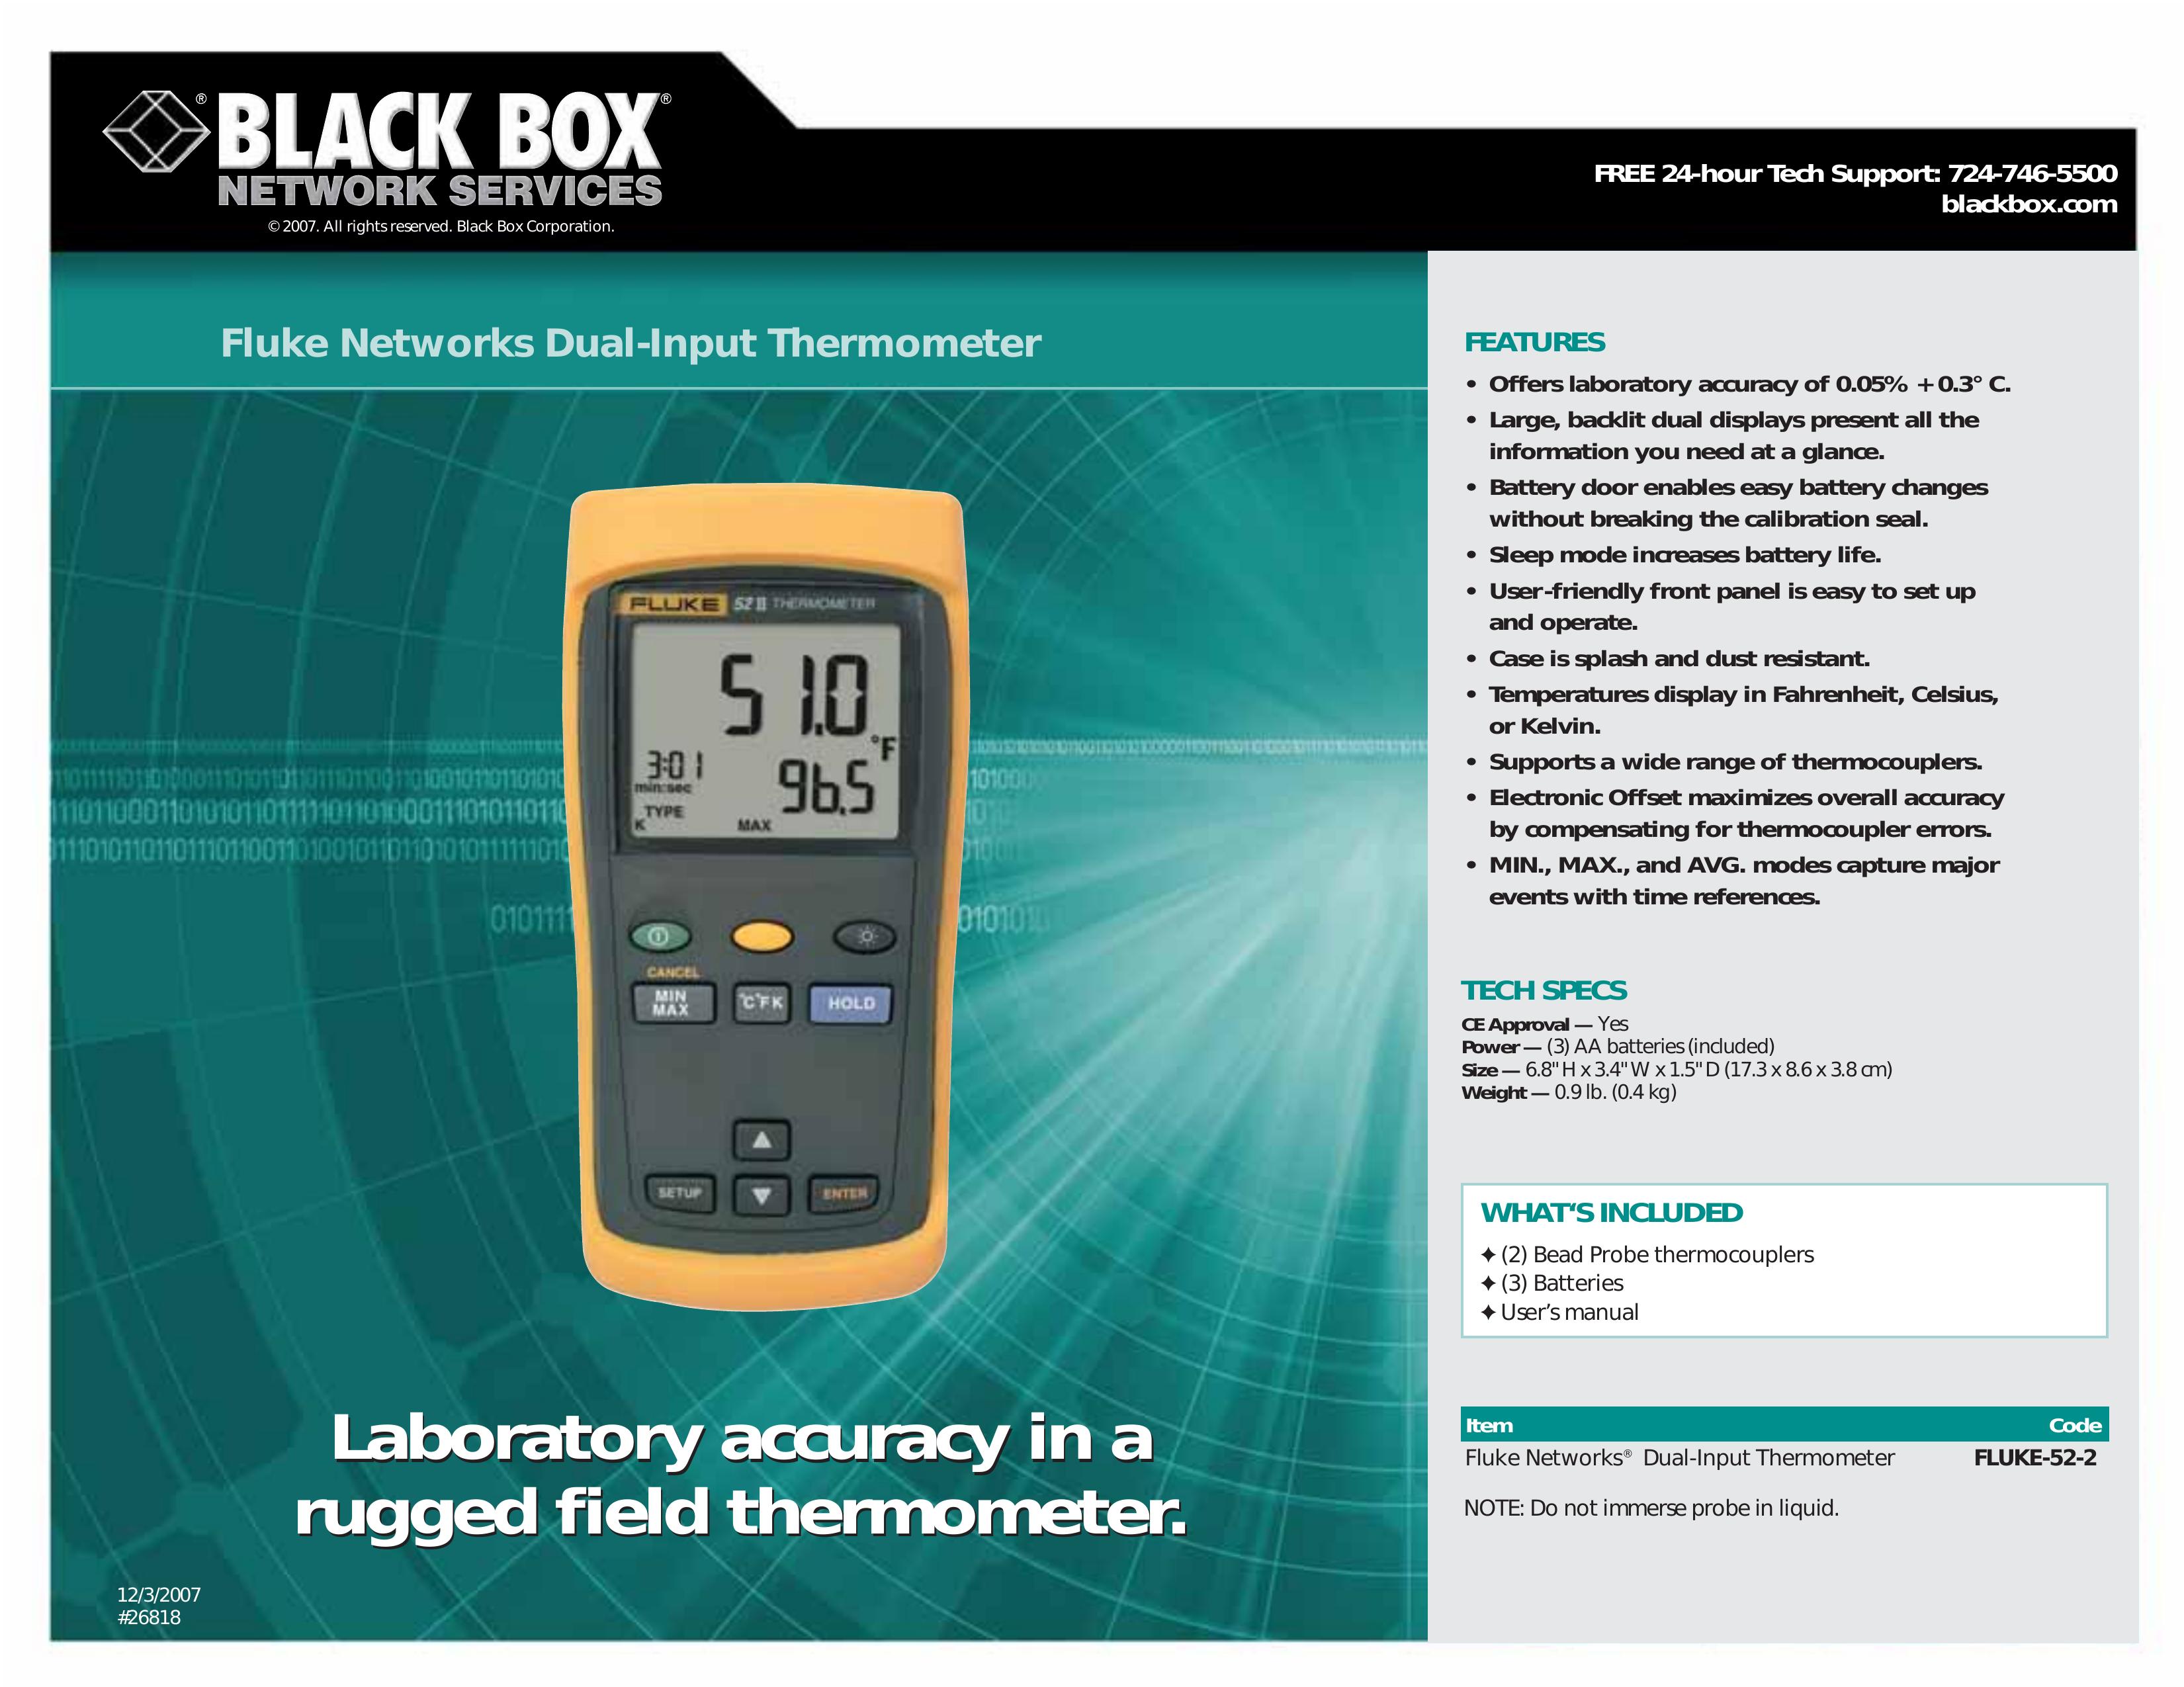 Black Box Dual-Input Thermometer Thermometer User Manual